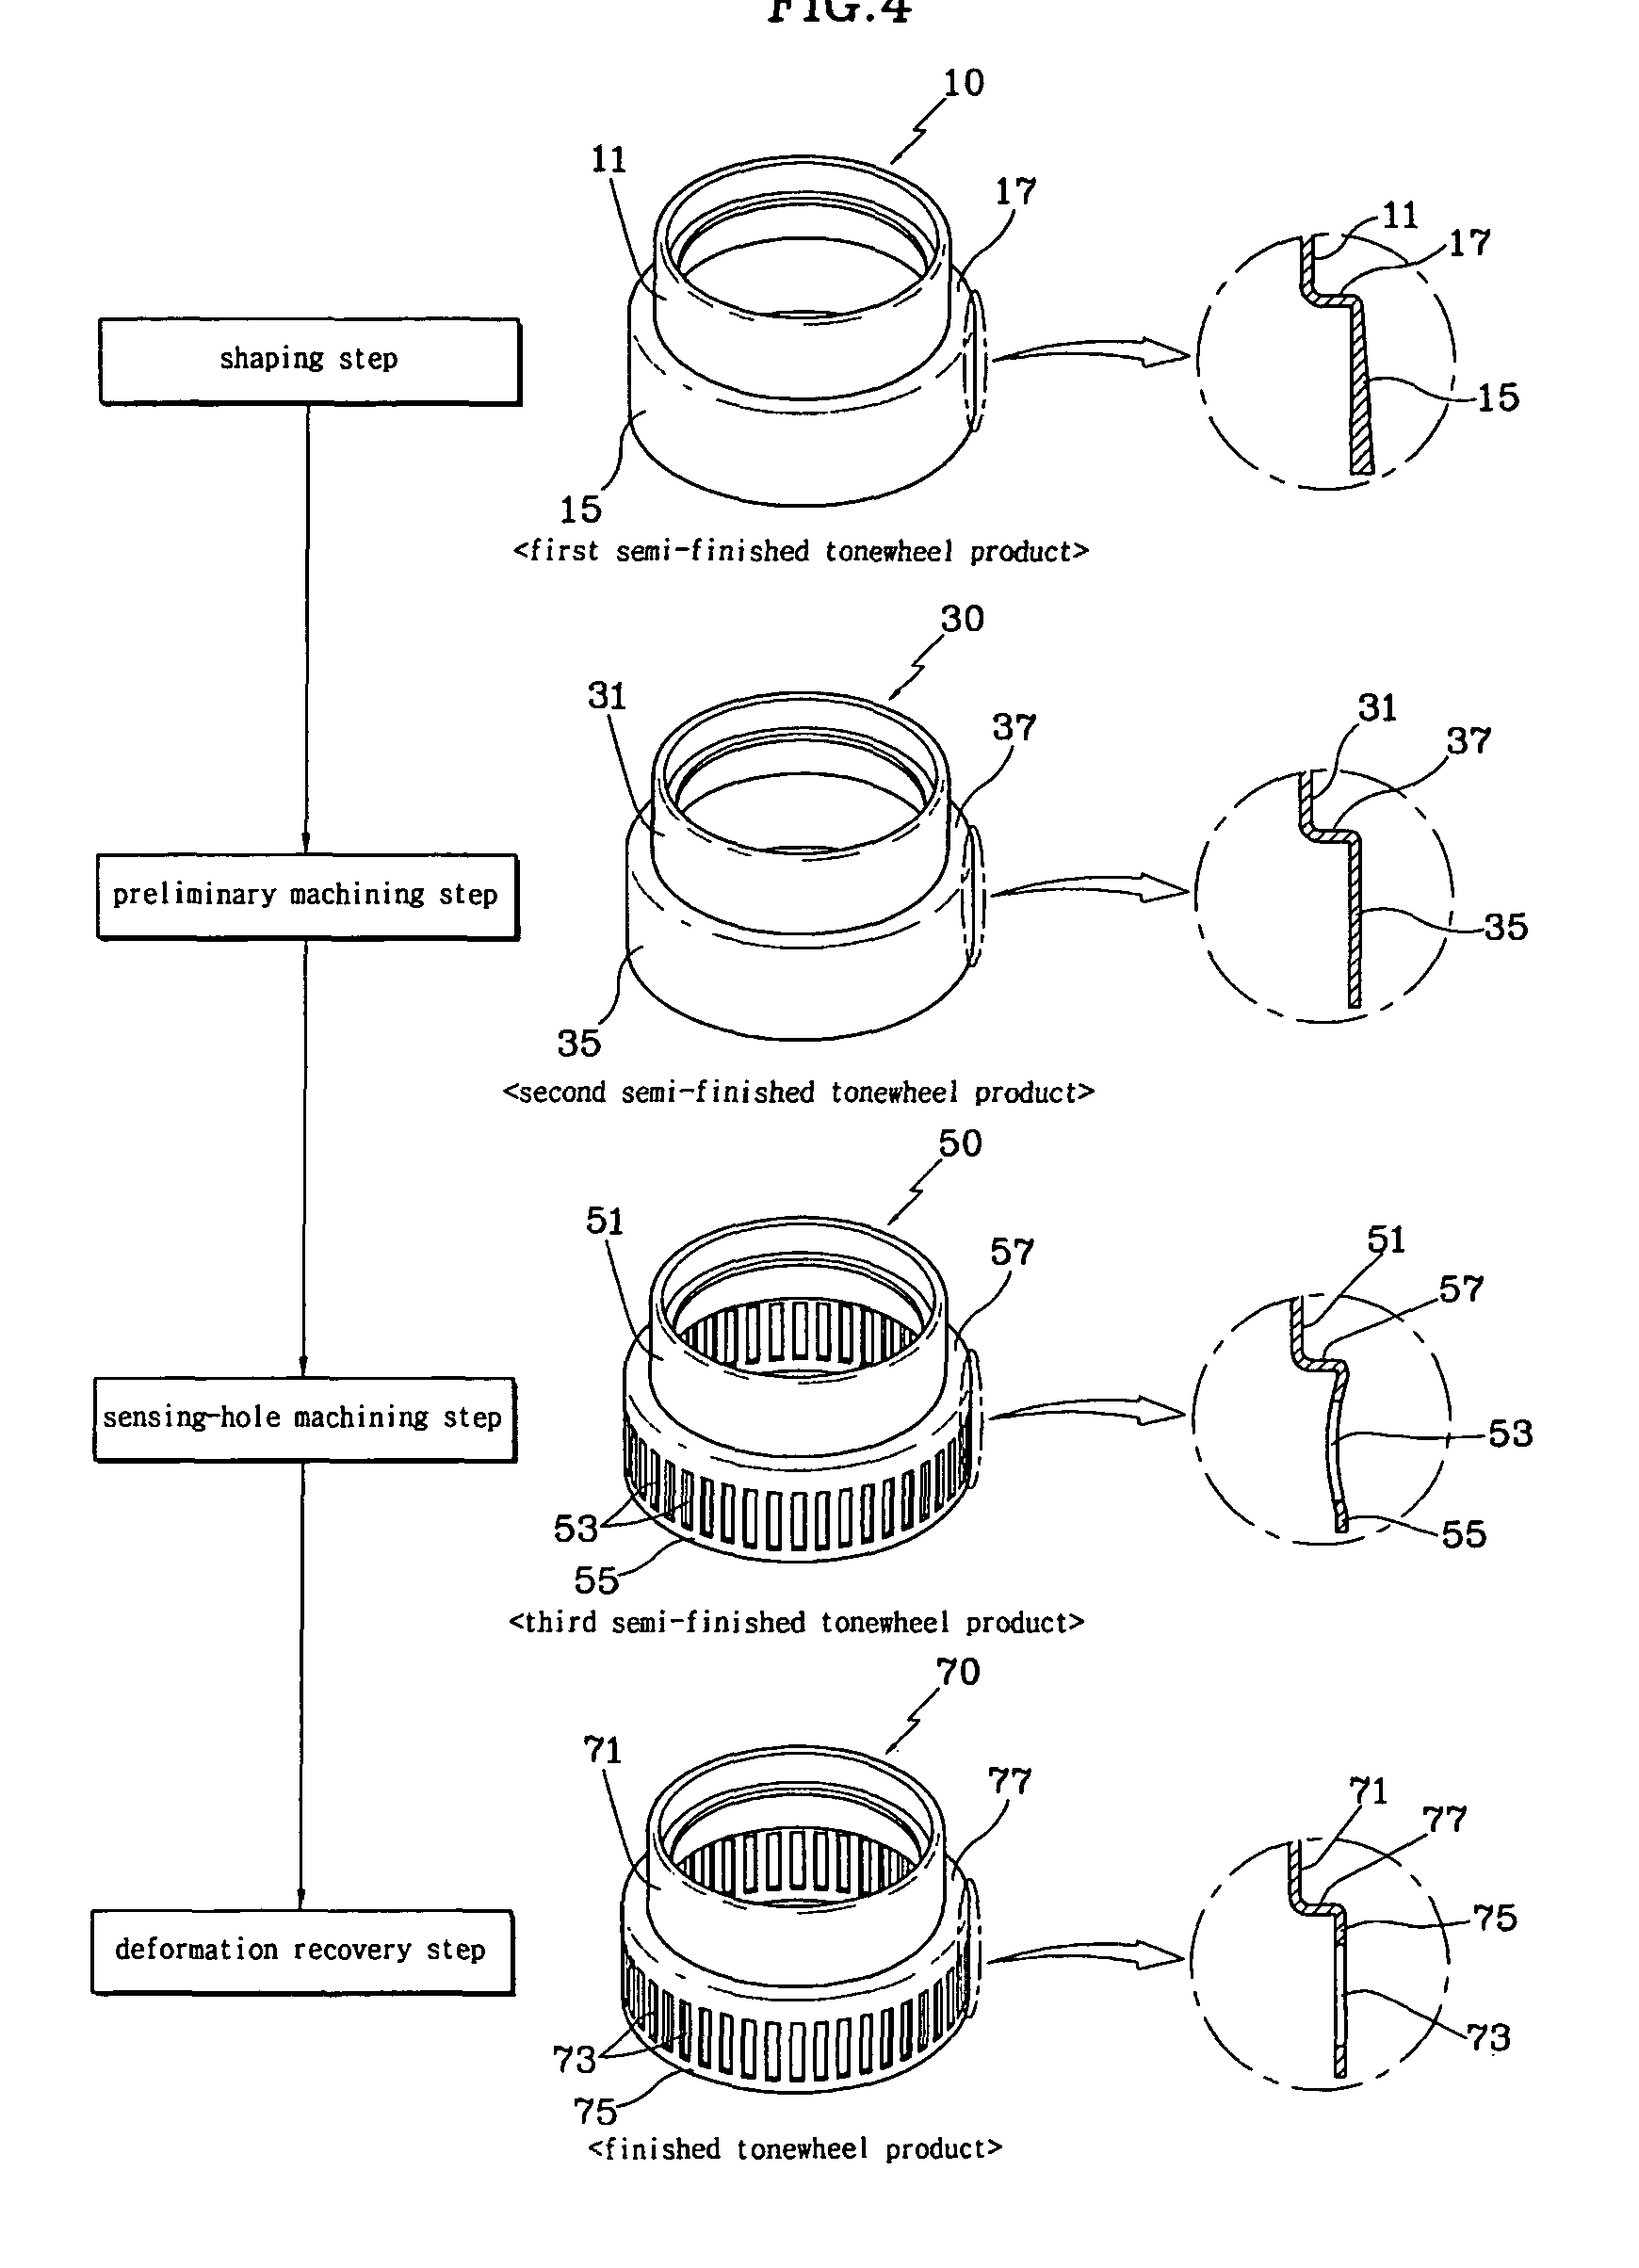 Method and apparatus for manufacturing tonewheel for vehicles